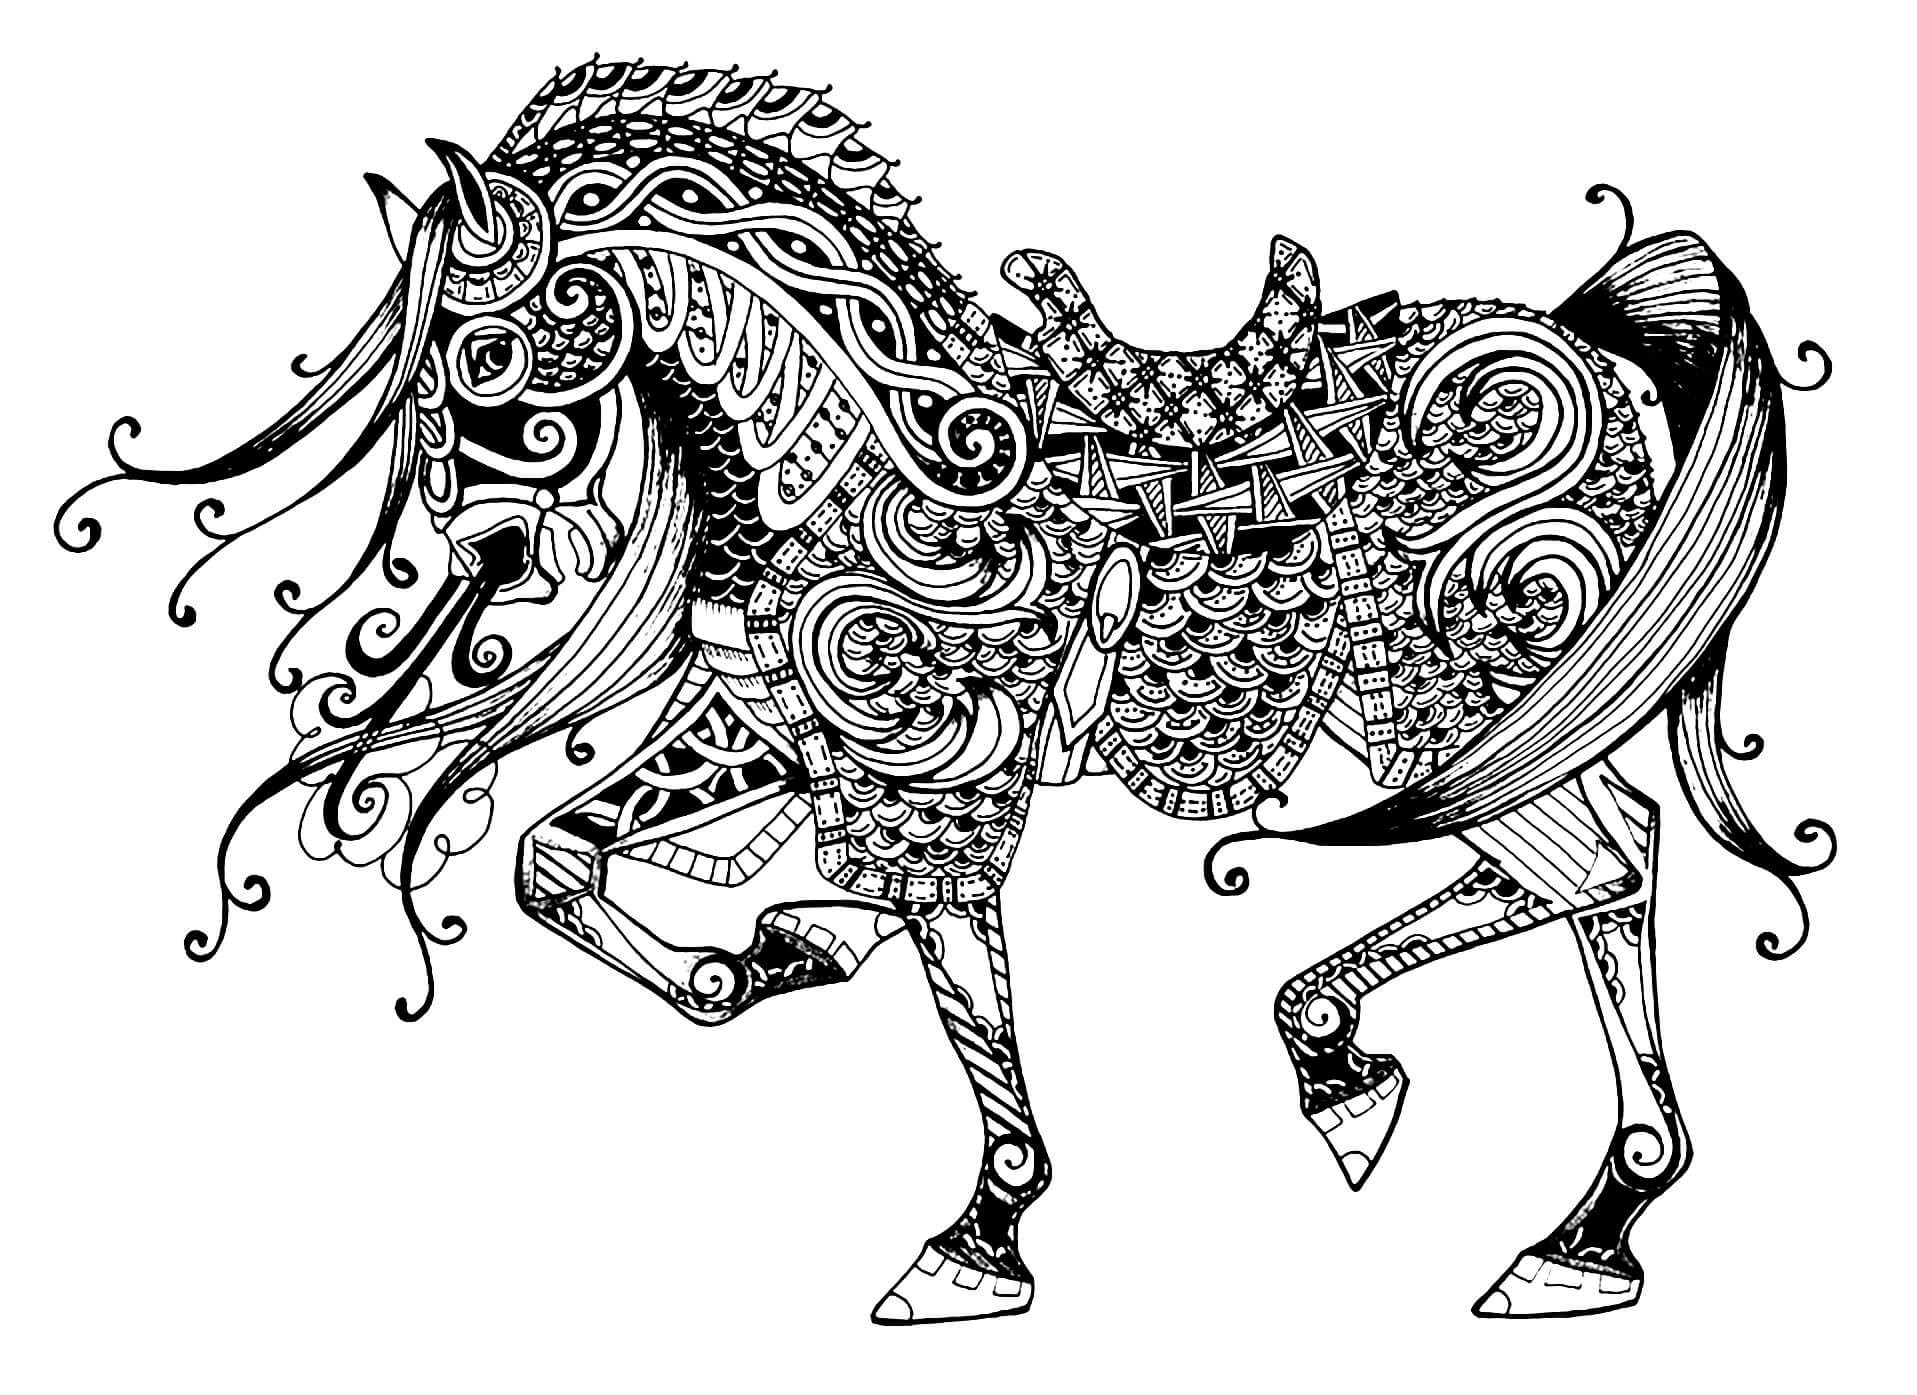 Hard Animal Coloring Pages Coloring Pages For Adults Difficult Animals Jvzooreview